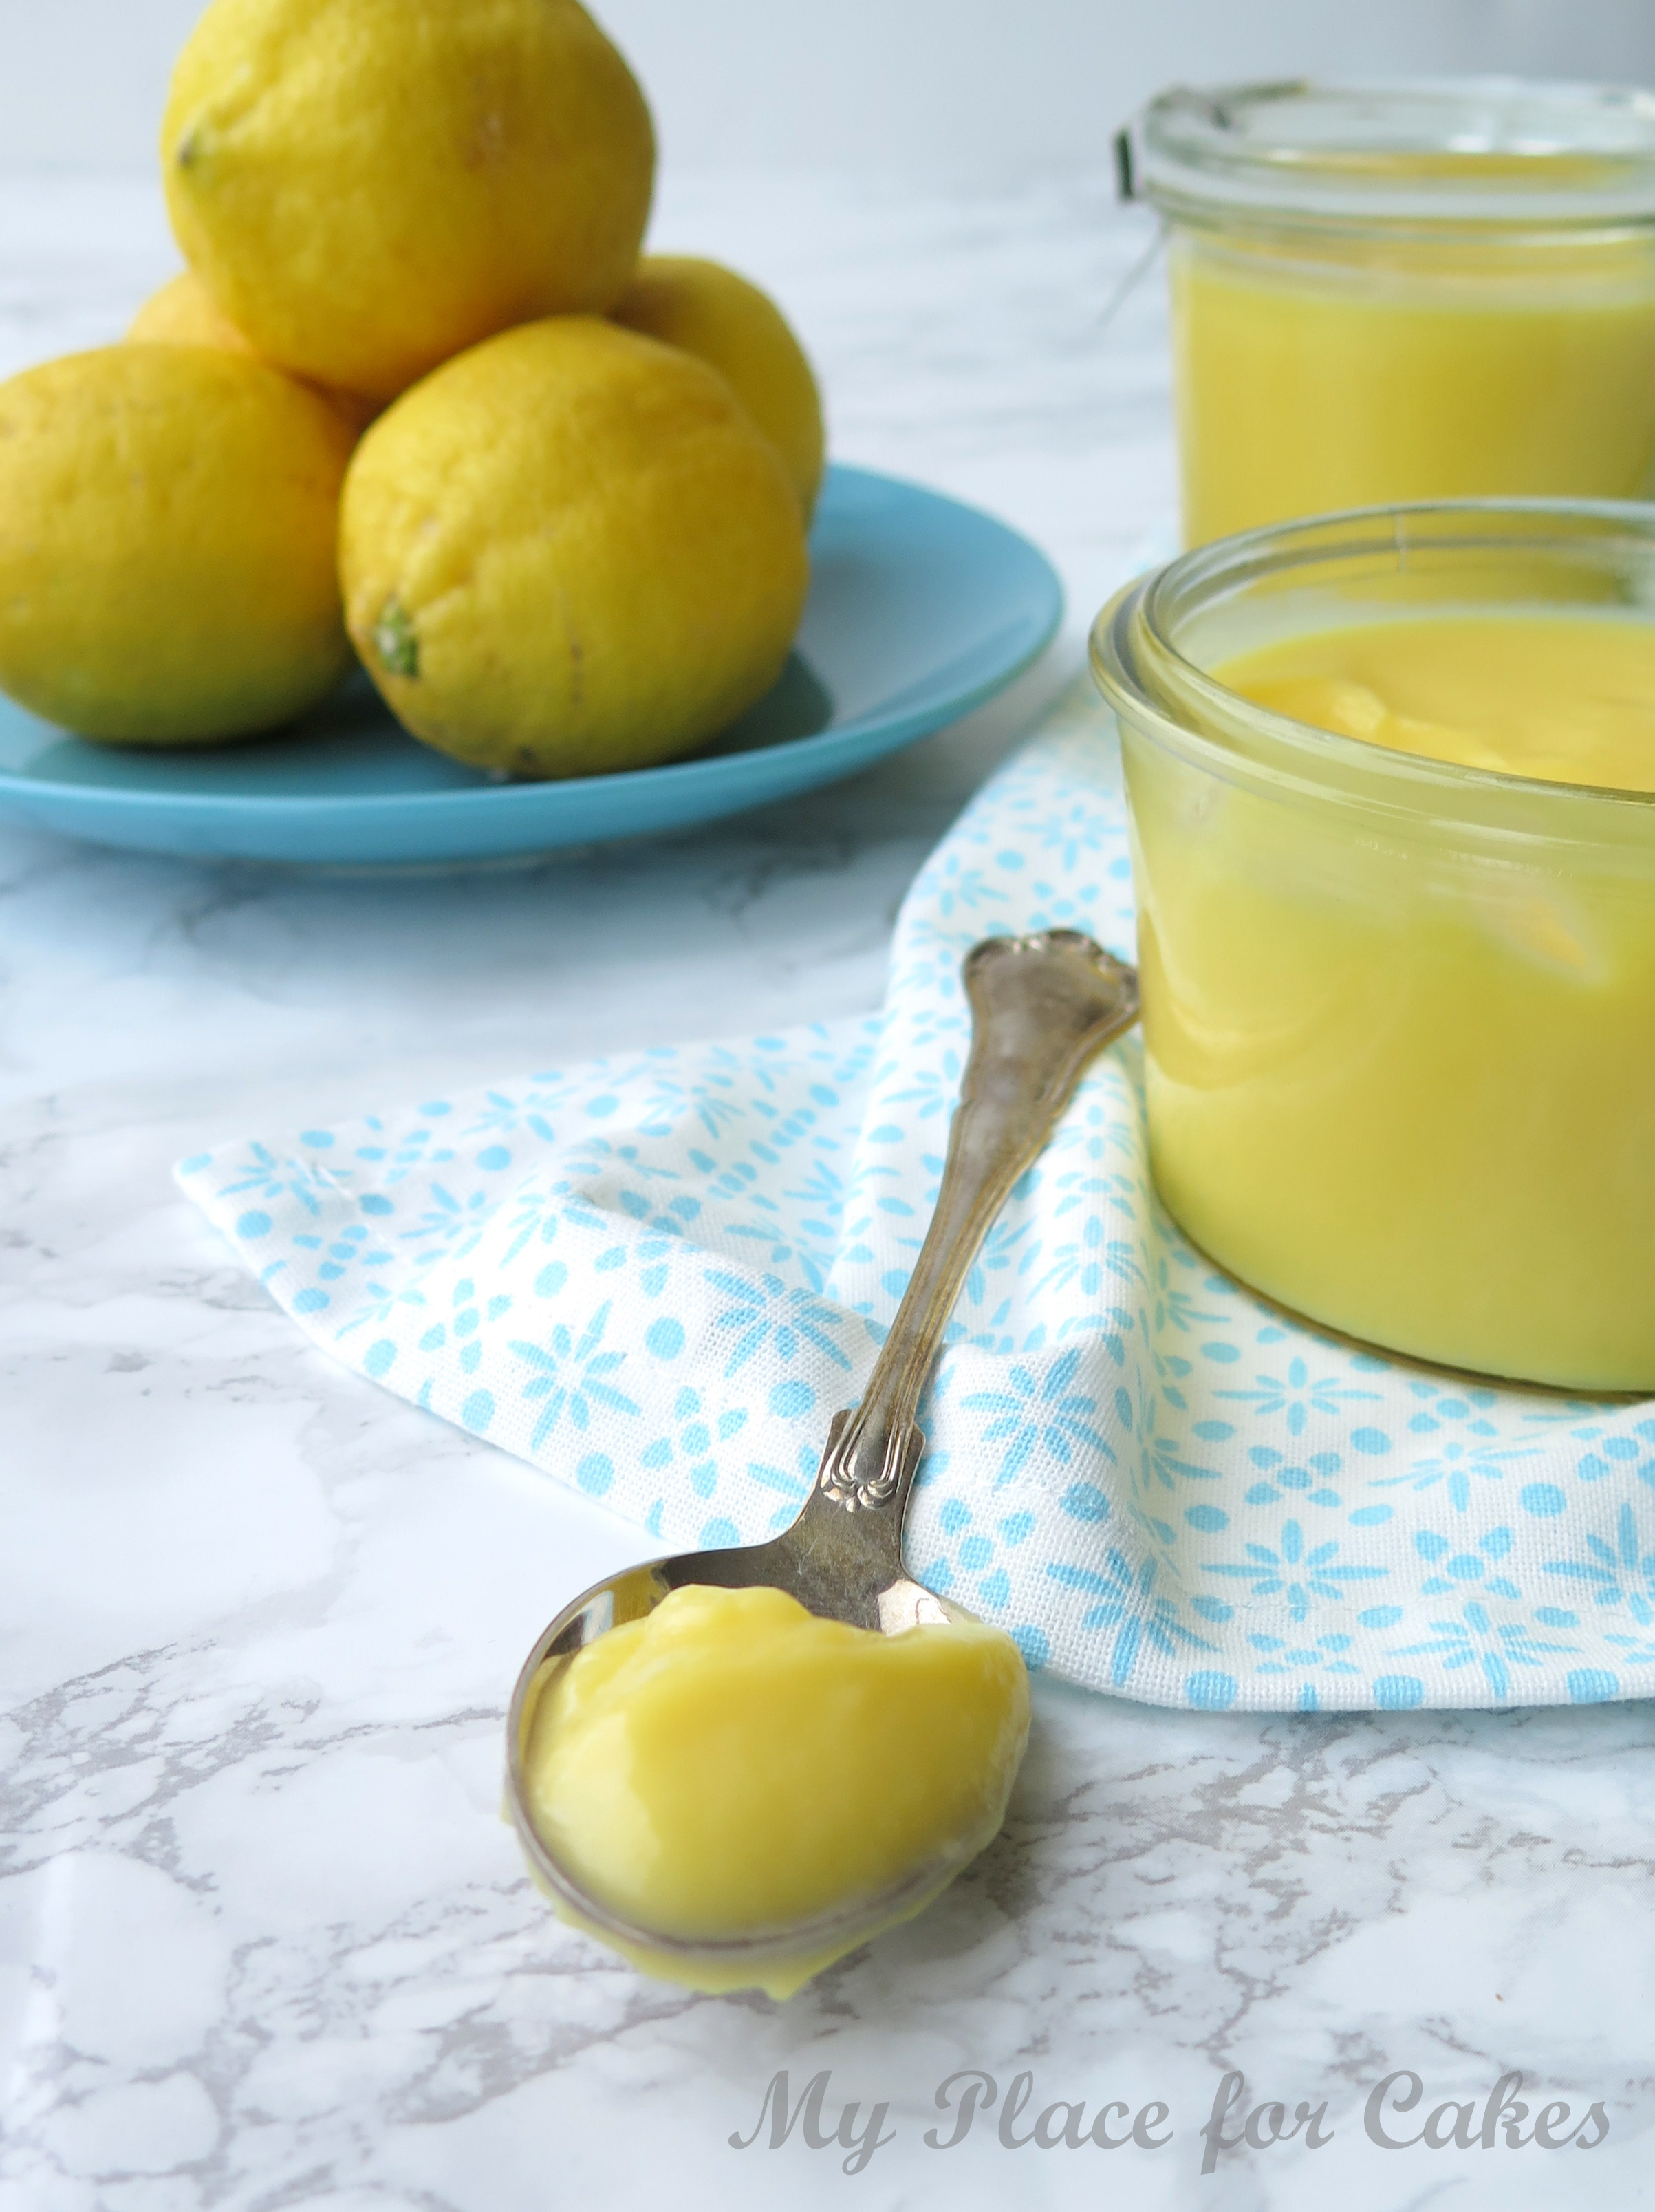 Lemon Curd - My Place for Cakes